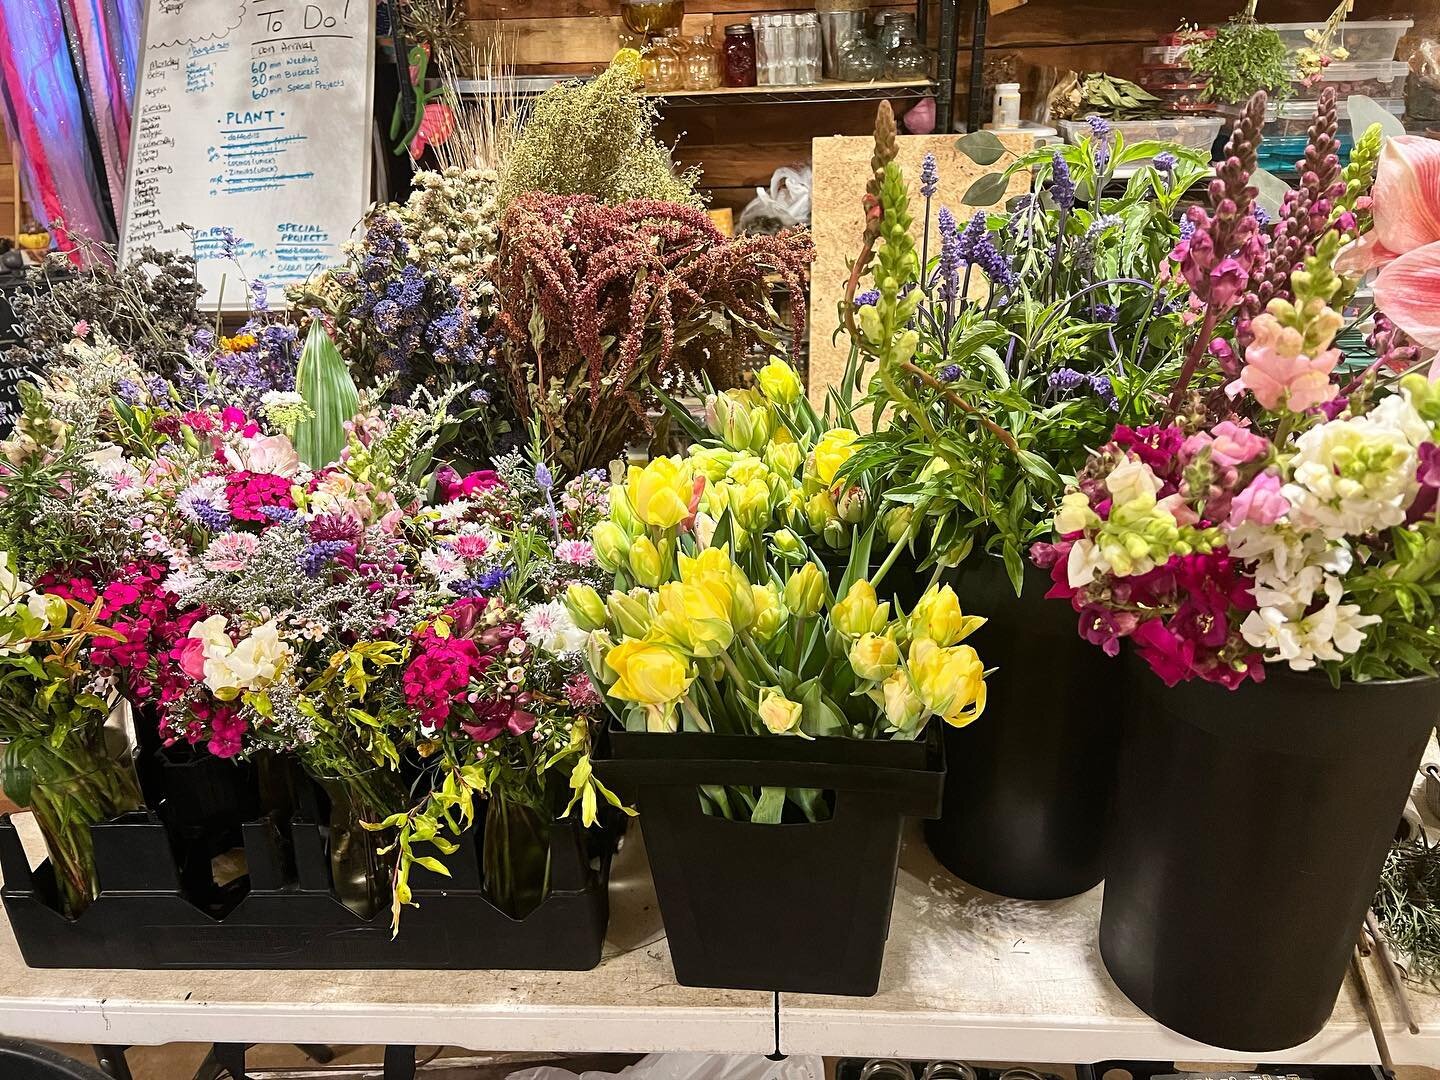 Maggie will be @palafoxmarket today with all the Spring flower vibes. She even has tulips from the last few crates we have growing! We will have some grab n go bouquets already made up, flowers by the stem 😍 and dried bouquets! #blossomlanefarm #spr